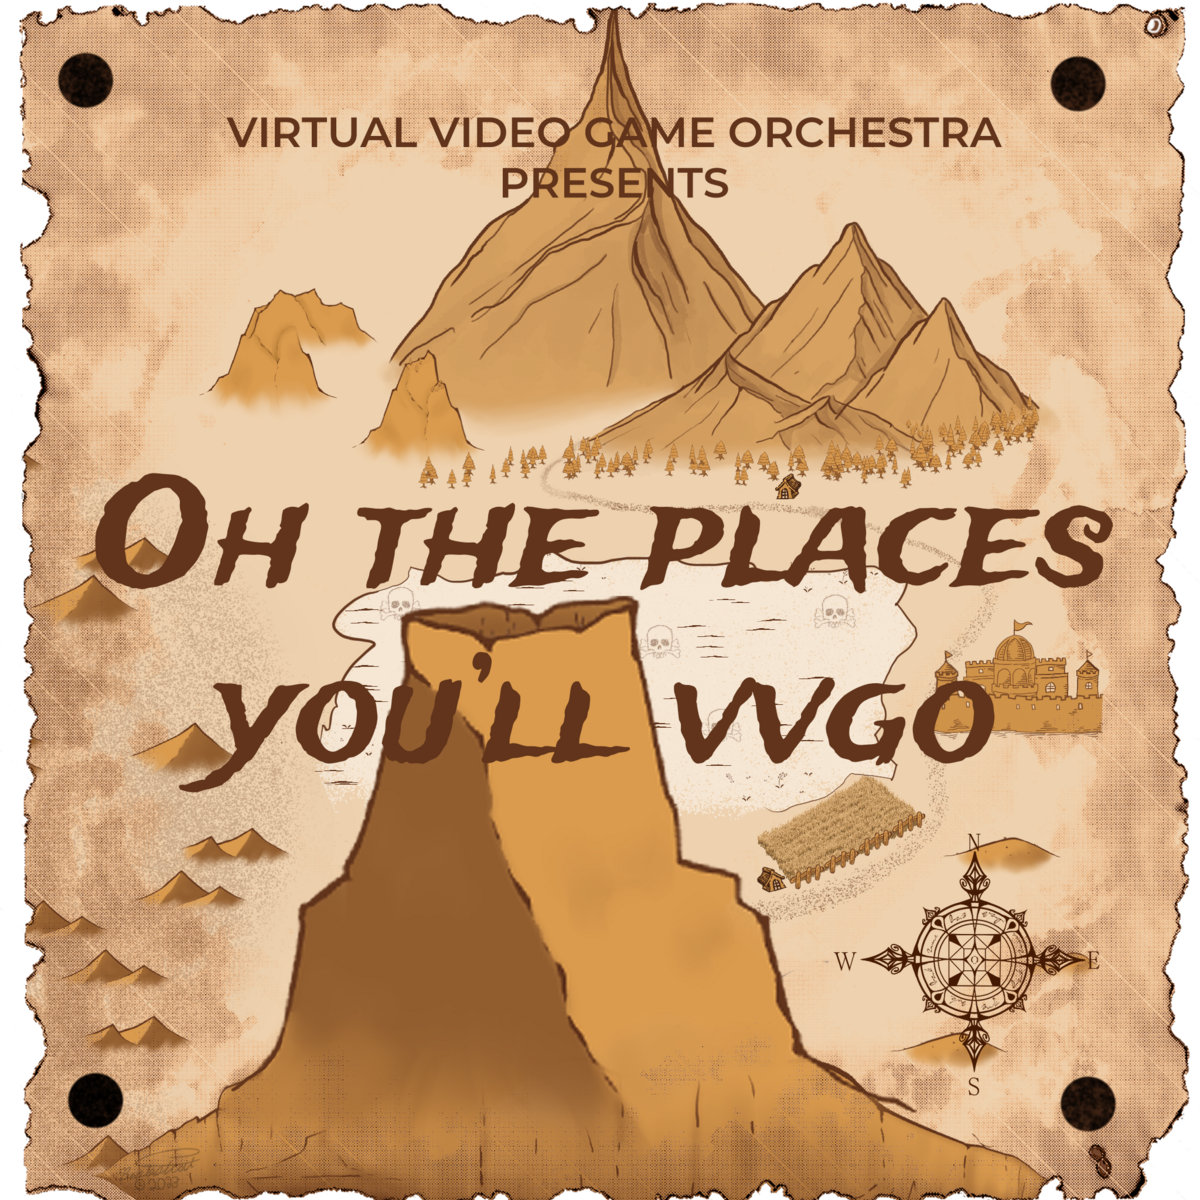 Oh, the Places You’ll VVGO!